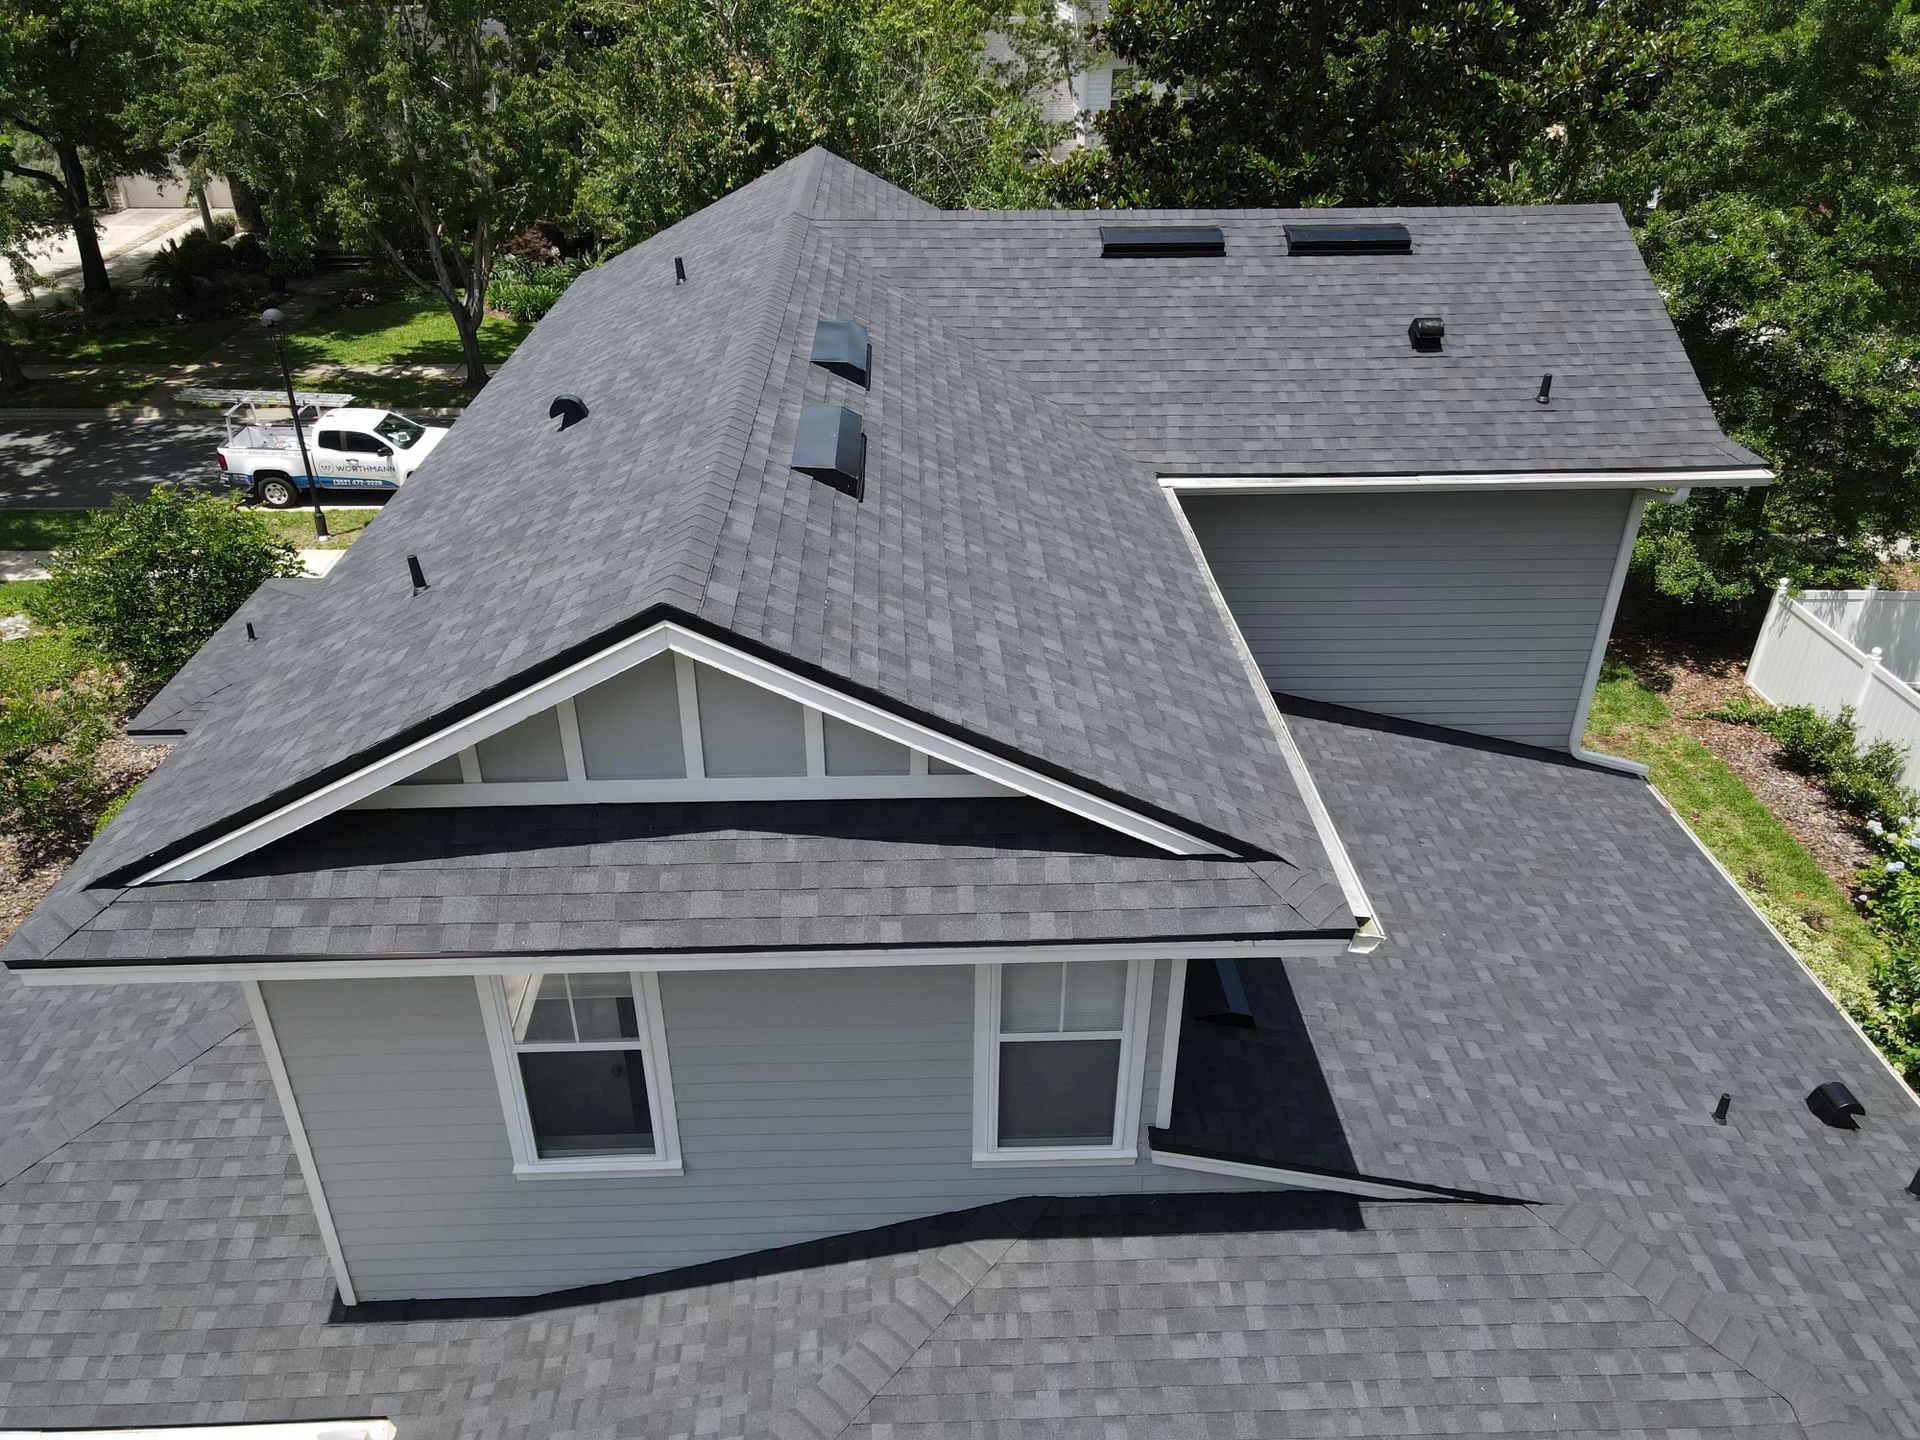 An aerial view of a residential home showing a new and clean roof made of dark-colored shingles.